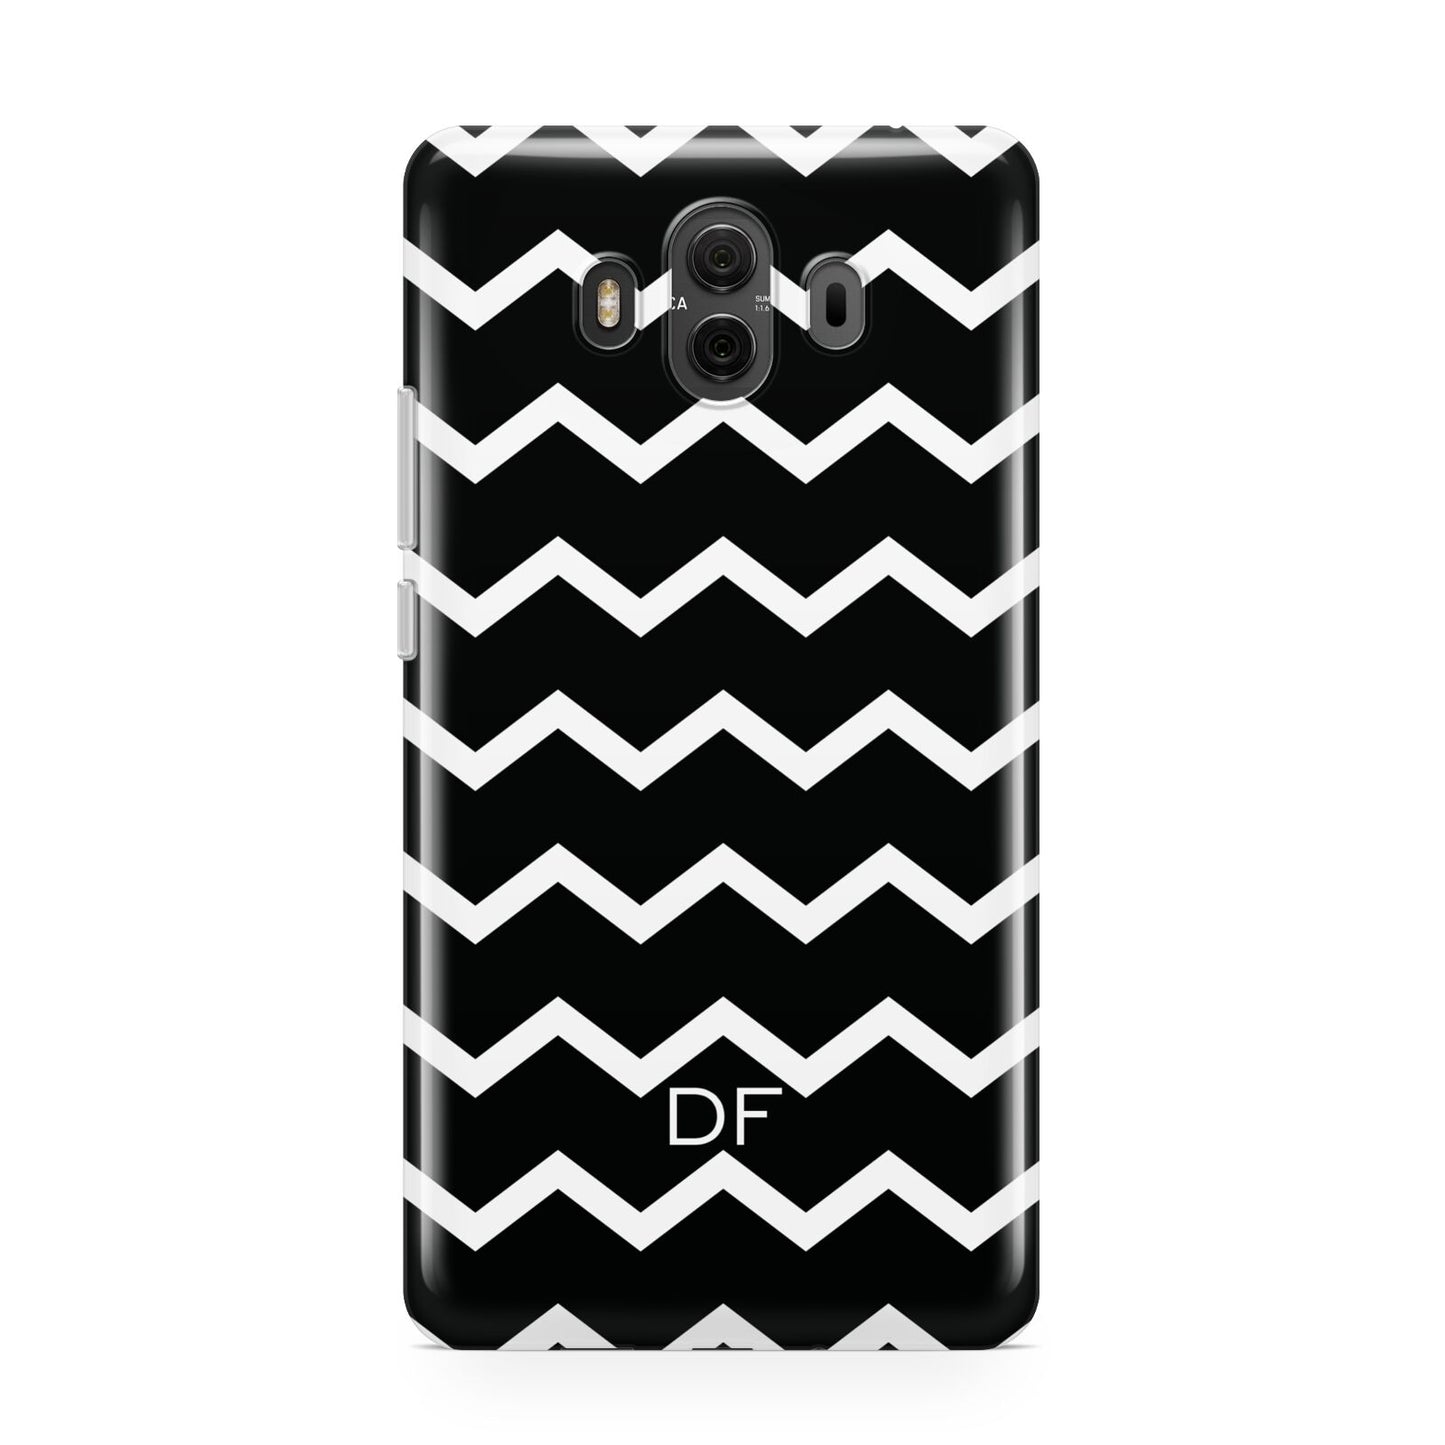 Personalised Chevron Black Huawei Mate 10 Protective Phone Case